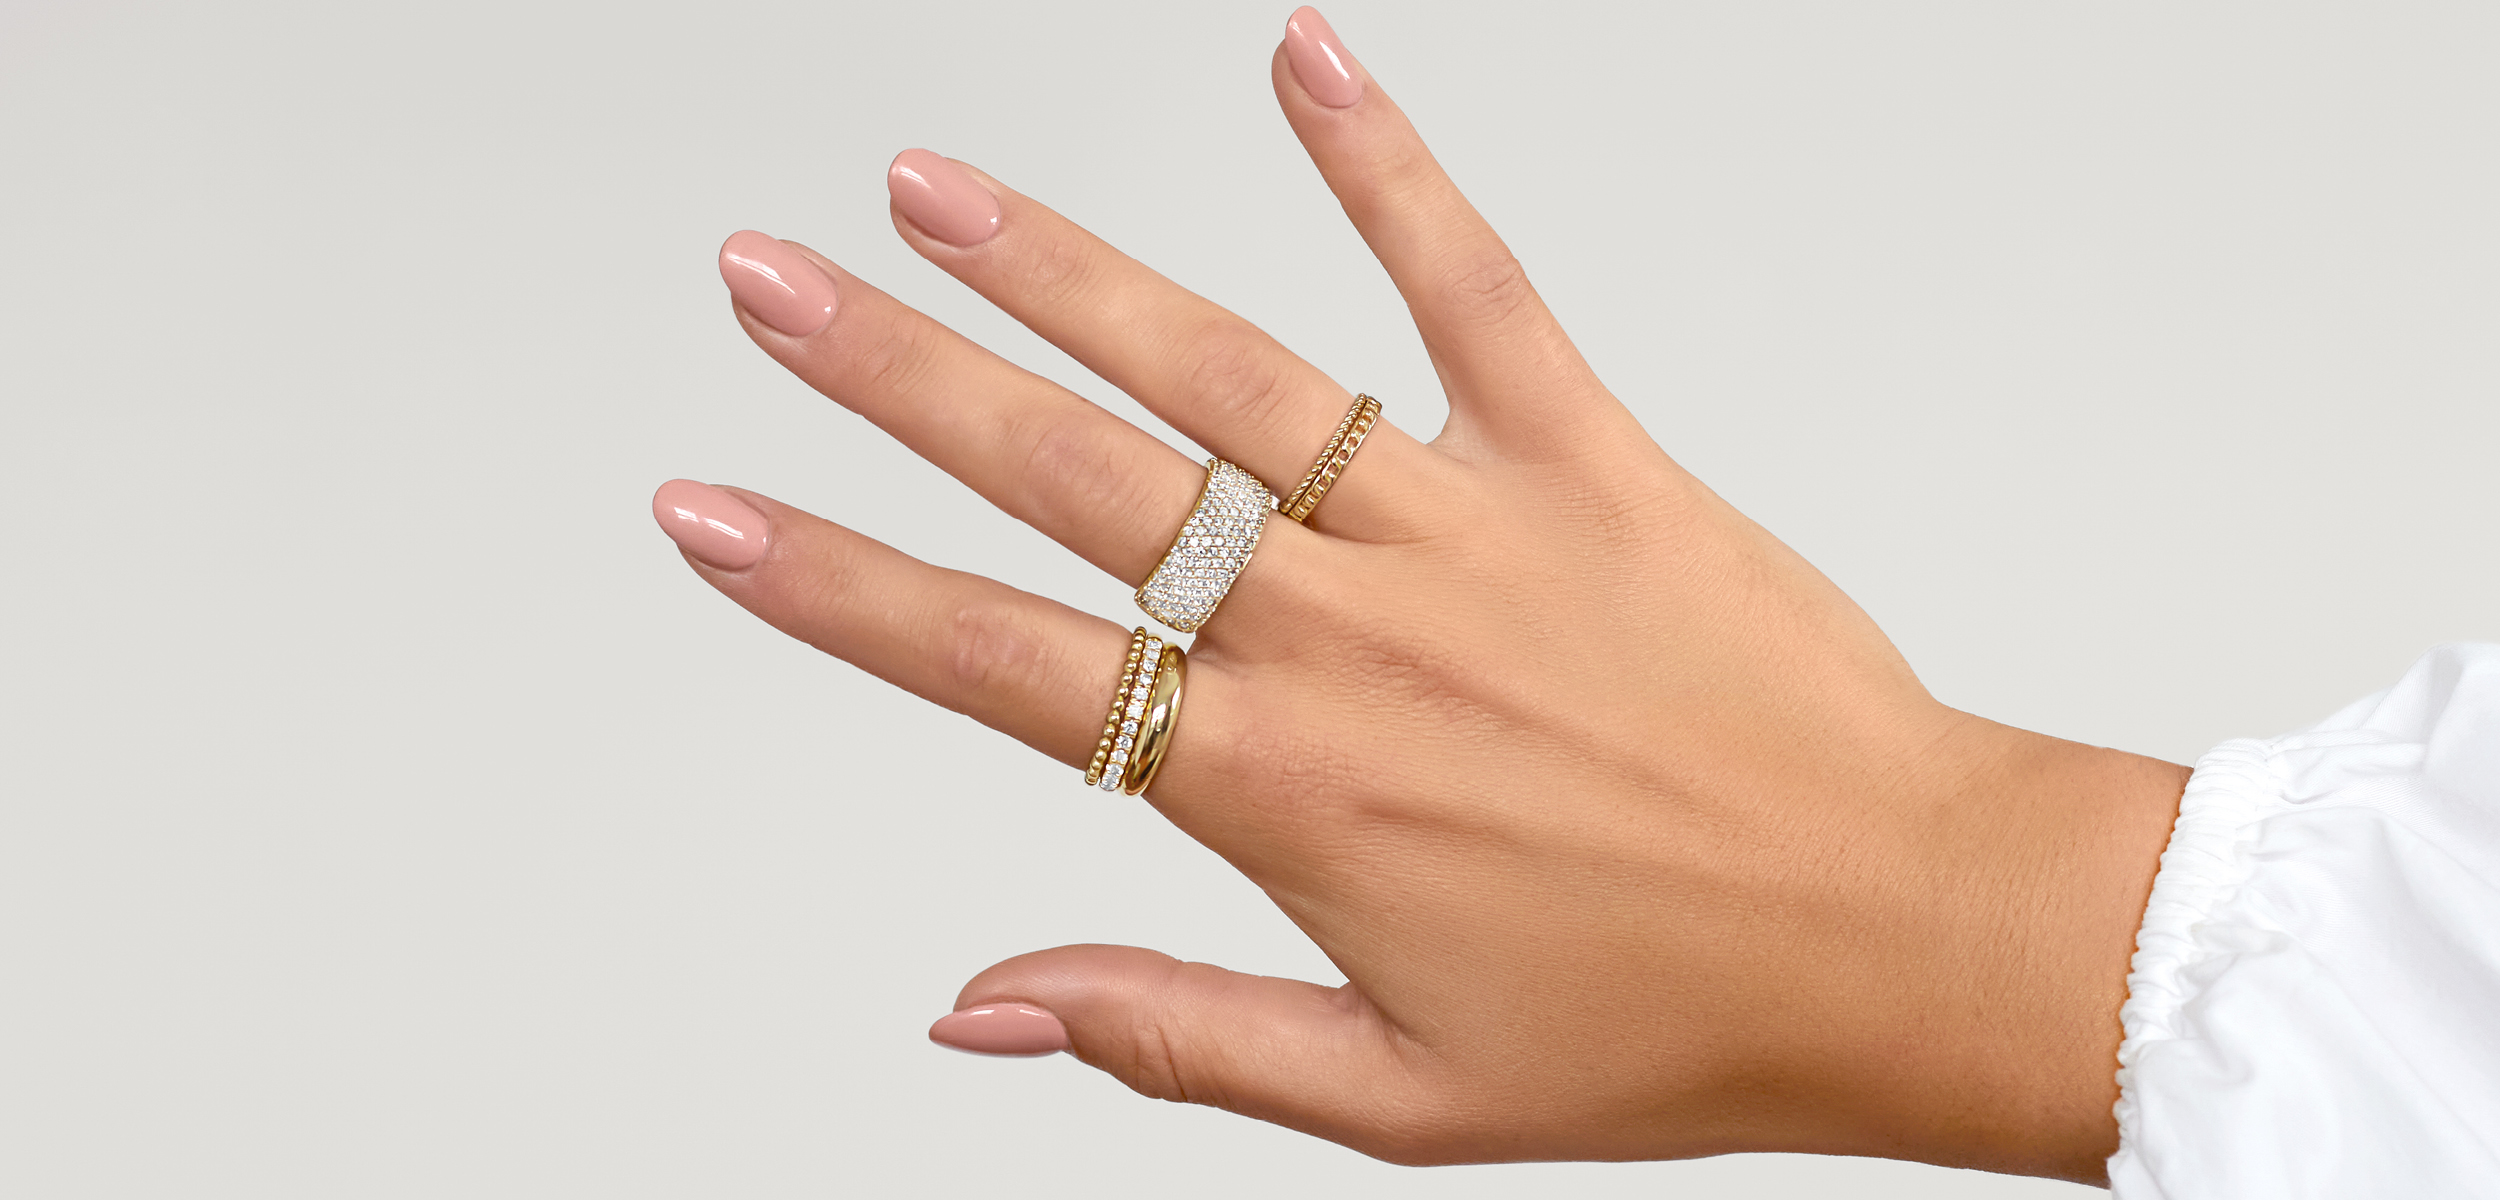 Female hand with multiple rings stacked together, including a statement diamond ring, diamond dainty rings and plain yellow gold bands.